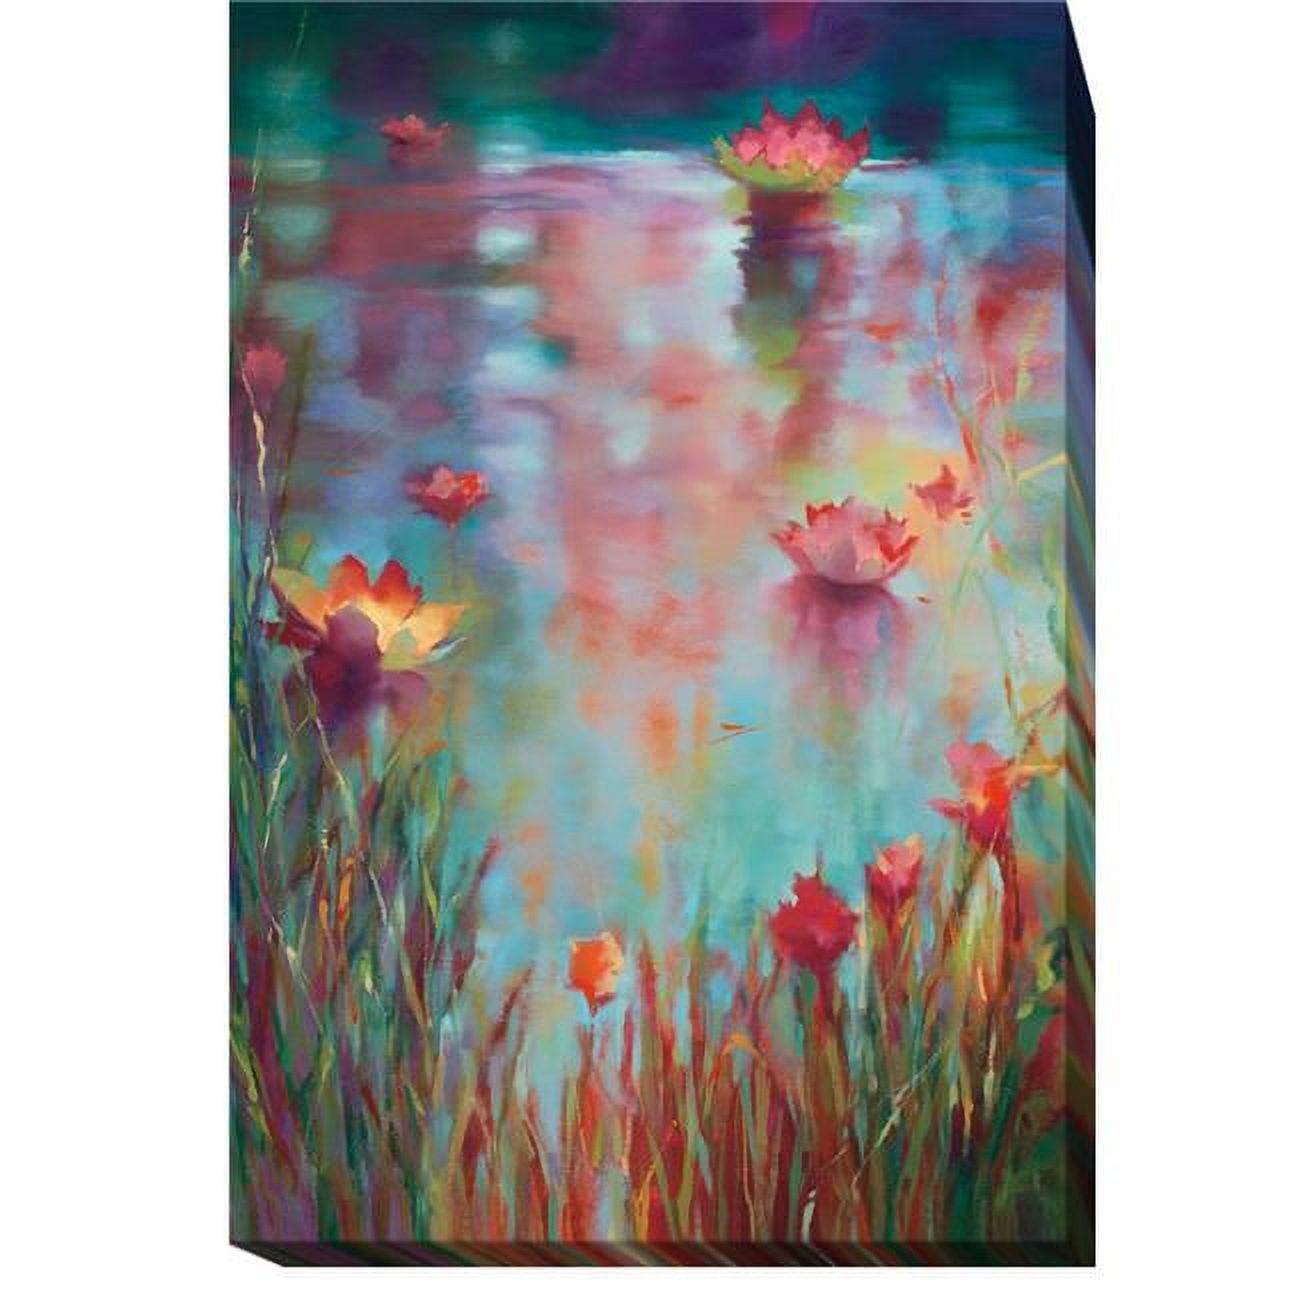 3045t845cg Garden Reeds By Donna Young Premium Oversize Gallery-wrapped Canvas Giclee Art - 45 X 30 X 1.5 In.